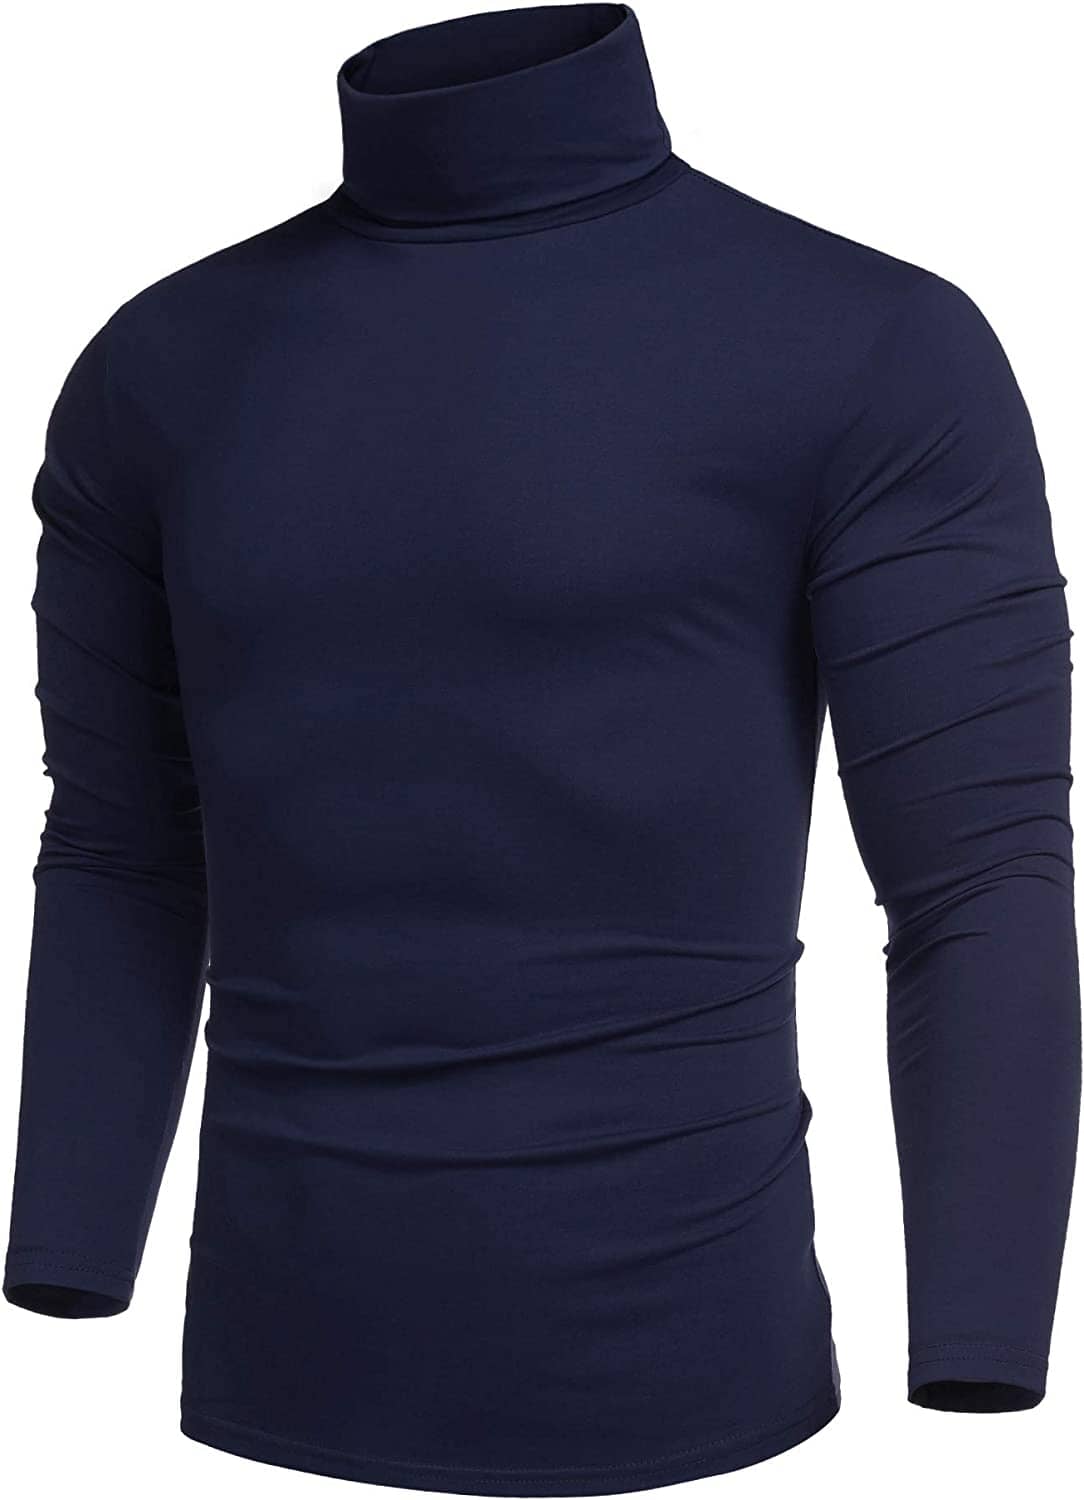 Slim Fit Turtleneck Basic Cotton Sweater (US Only) Sweaters COOFANDY Store Navy Blue S 